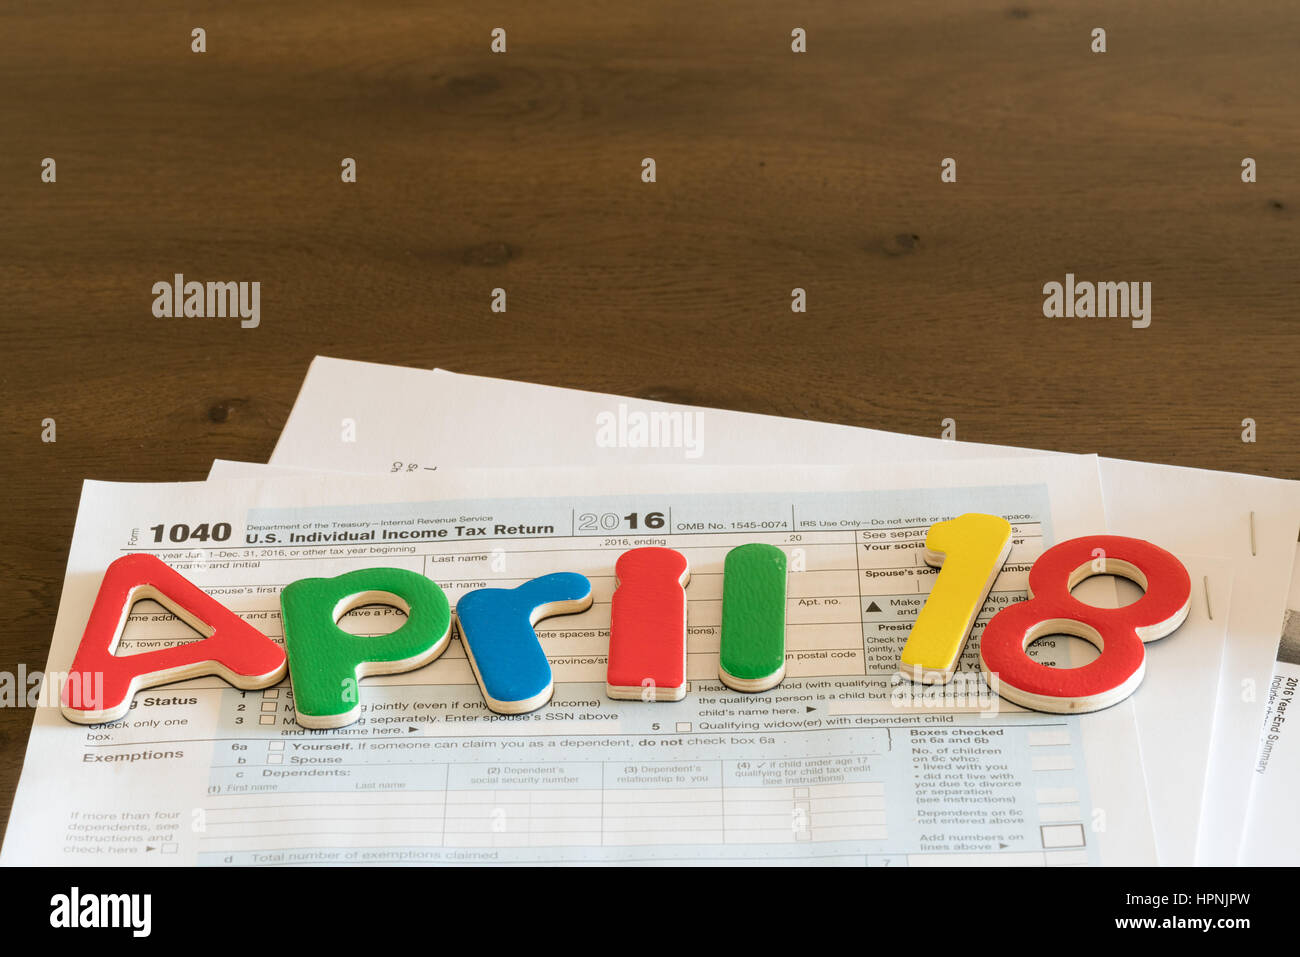 Wooden letters on top of 1040 income tax form for 2016 showing tax day for filing is April 18 2017 Stock Photo